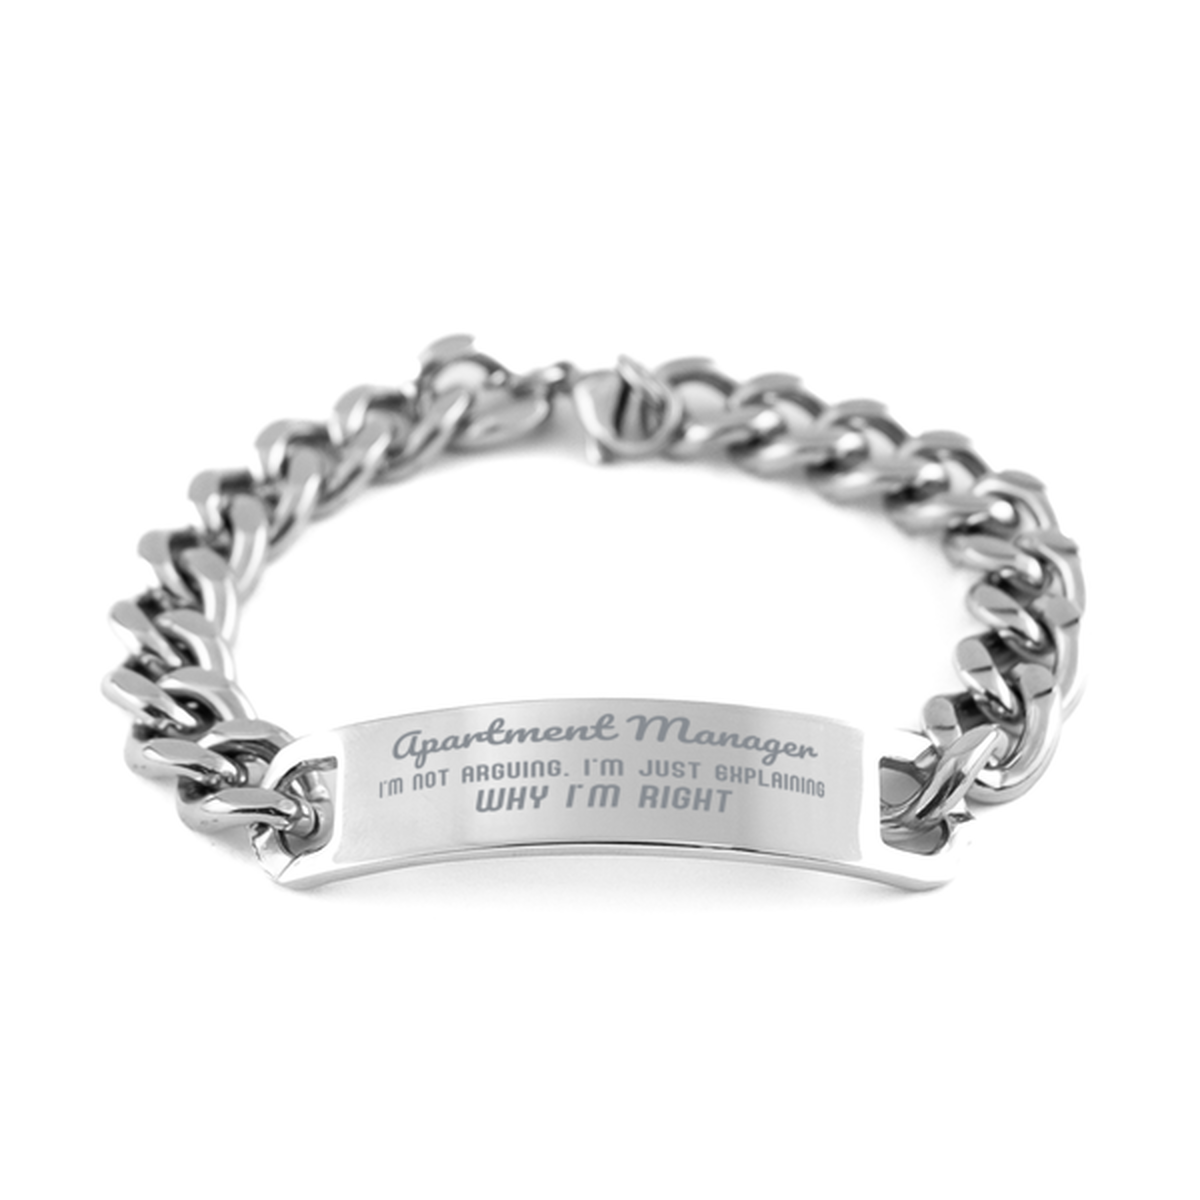 Apartment Manager I'm not Arguing. I'm Just Explaining Why I'm RIGHT Cuban Chain Stainless Steel Bracelet, Graduation Birthday Christmas Apartment Manager Gifts For Apartment Manager Funny Saying Quote Present for Men Women Coworker